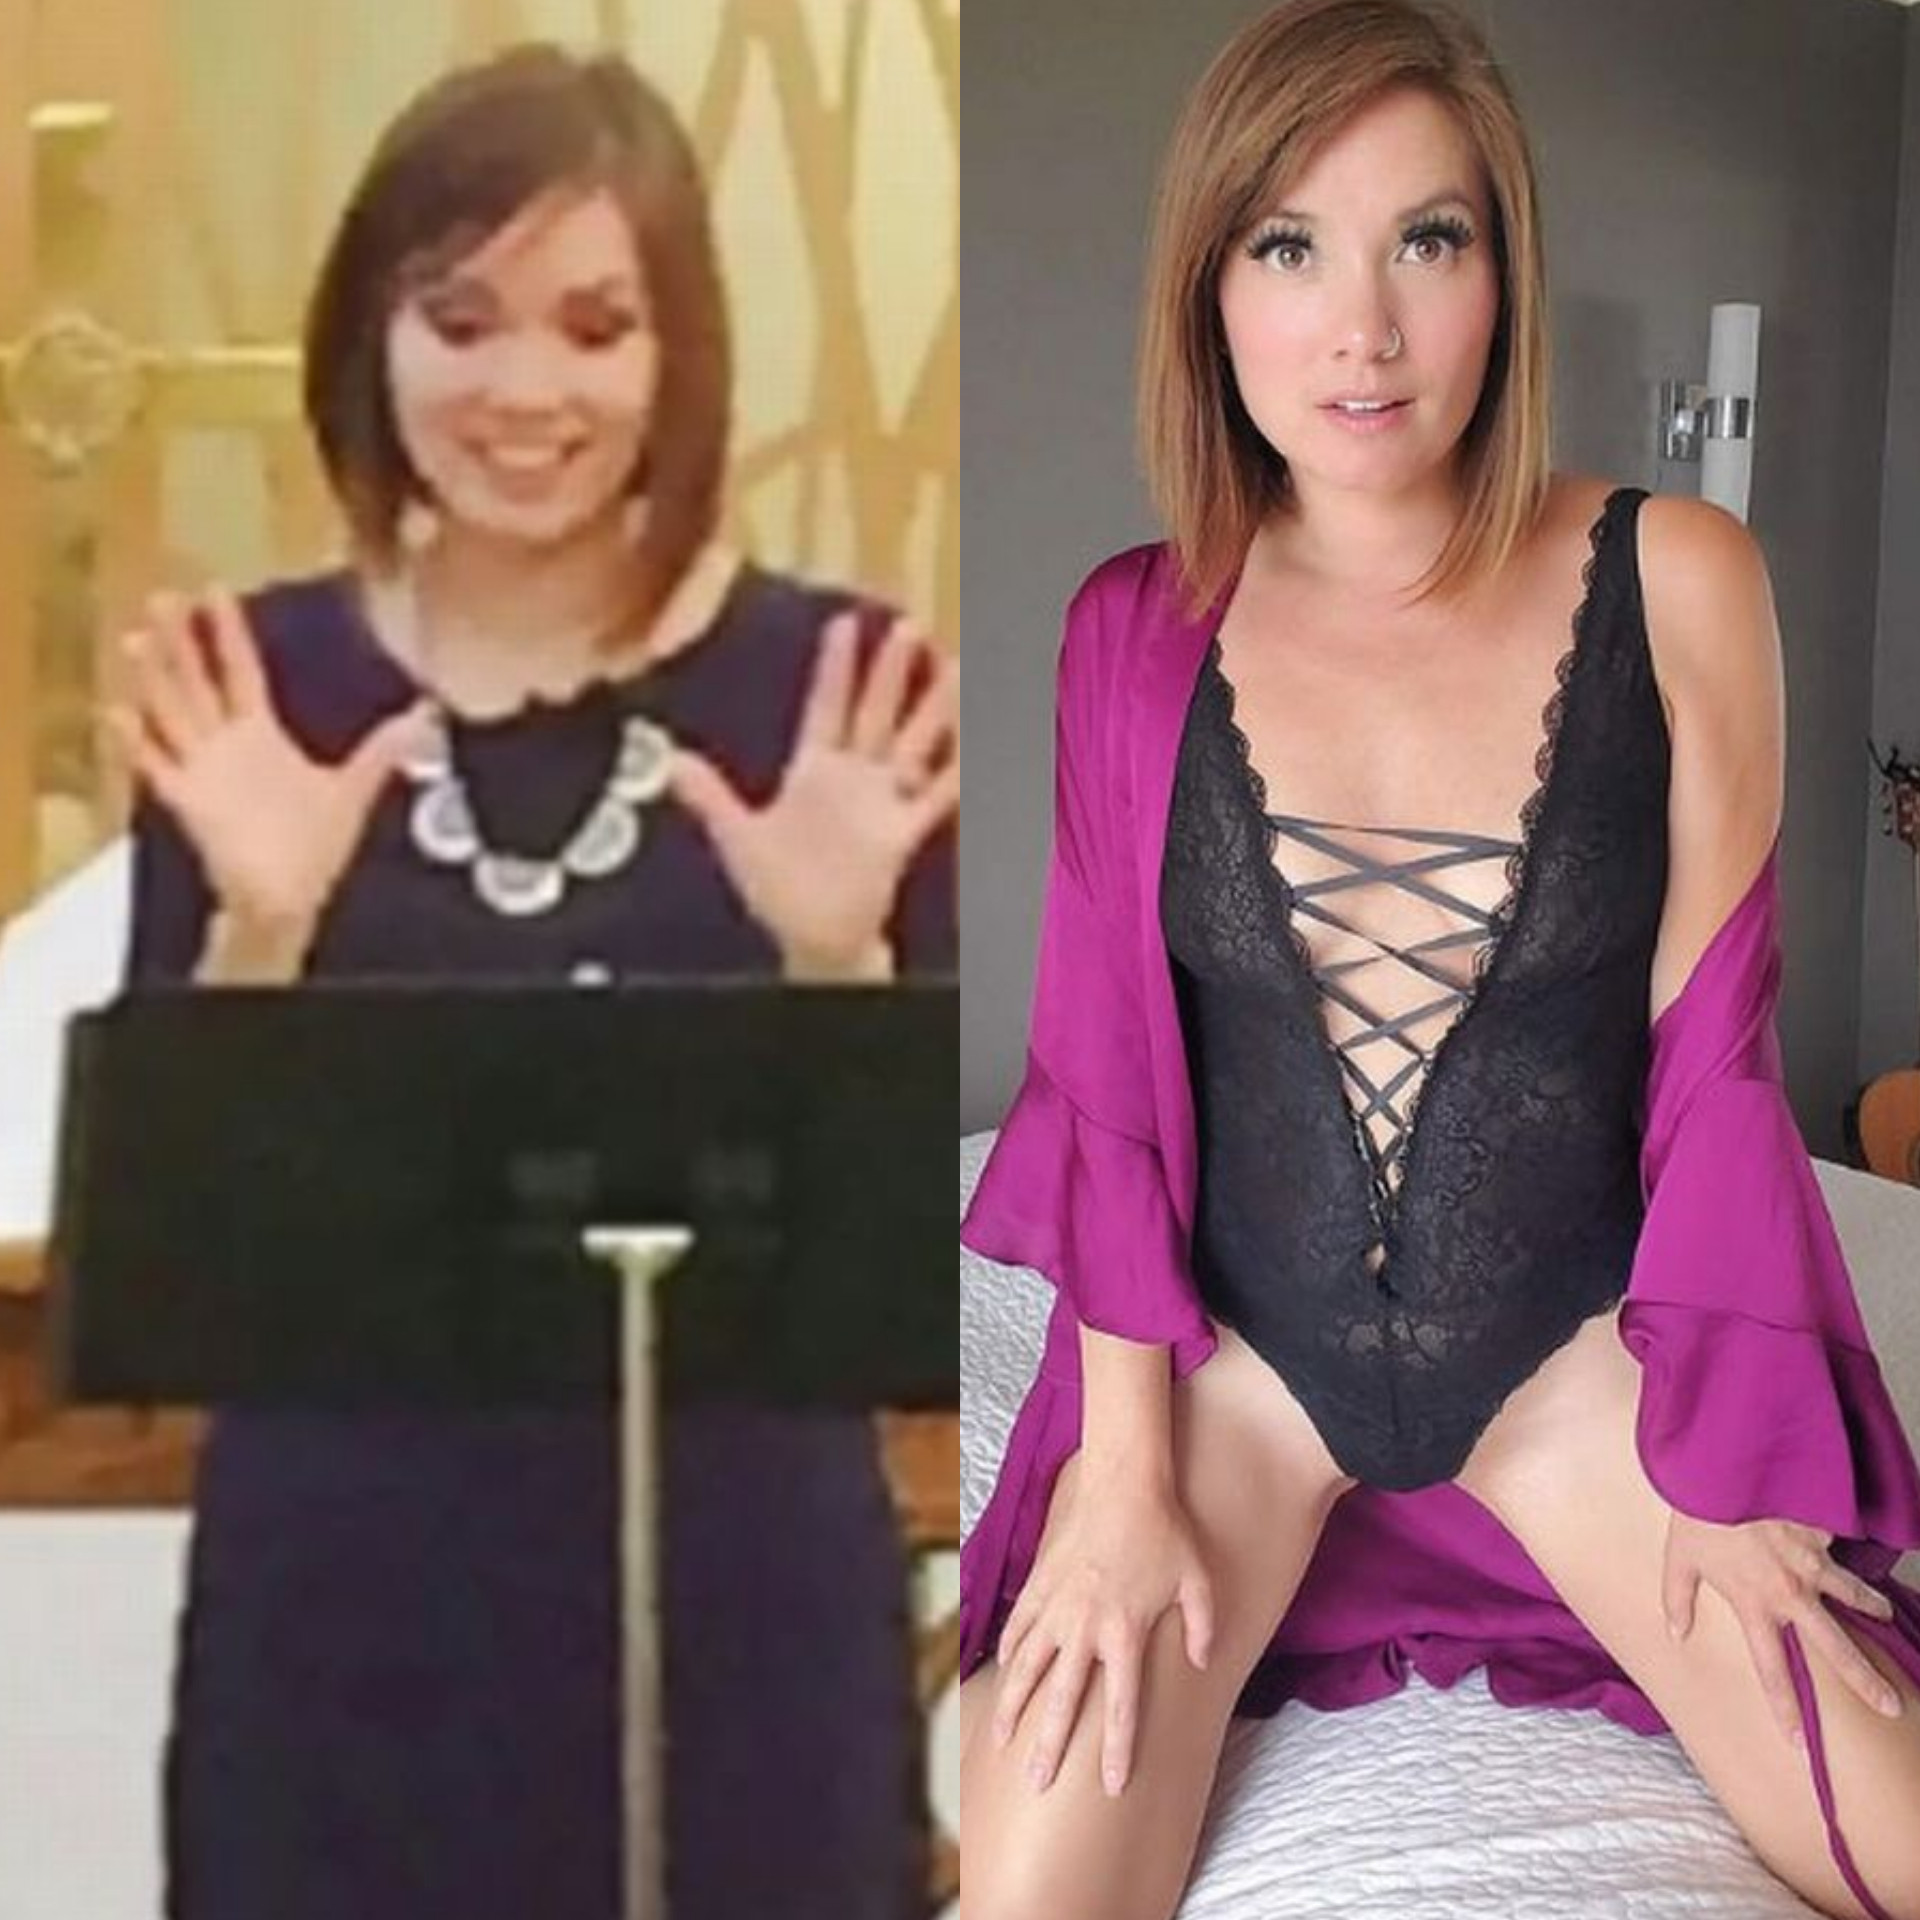 Pastor Turned Stripper Reveals Sex Work Has Made Her A Better Mum Than Her Church Upbringing Afnews pic picture